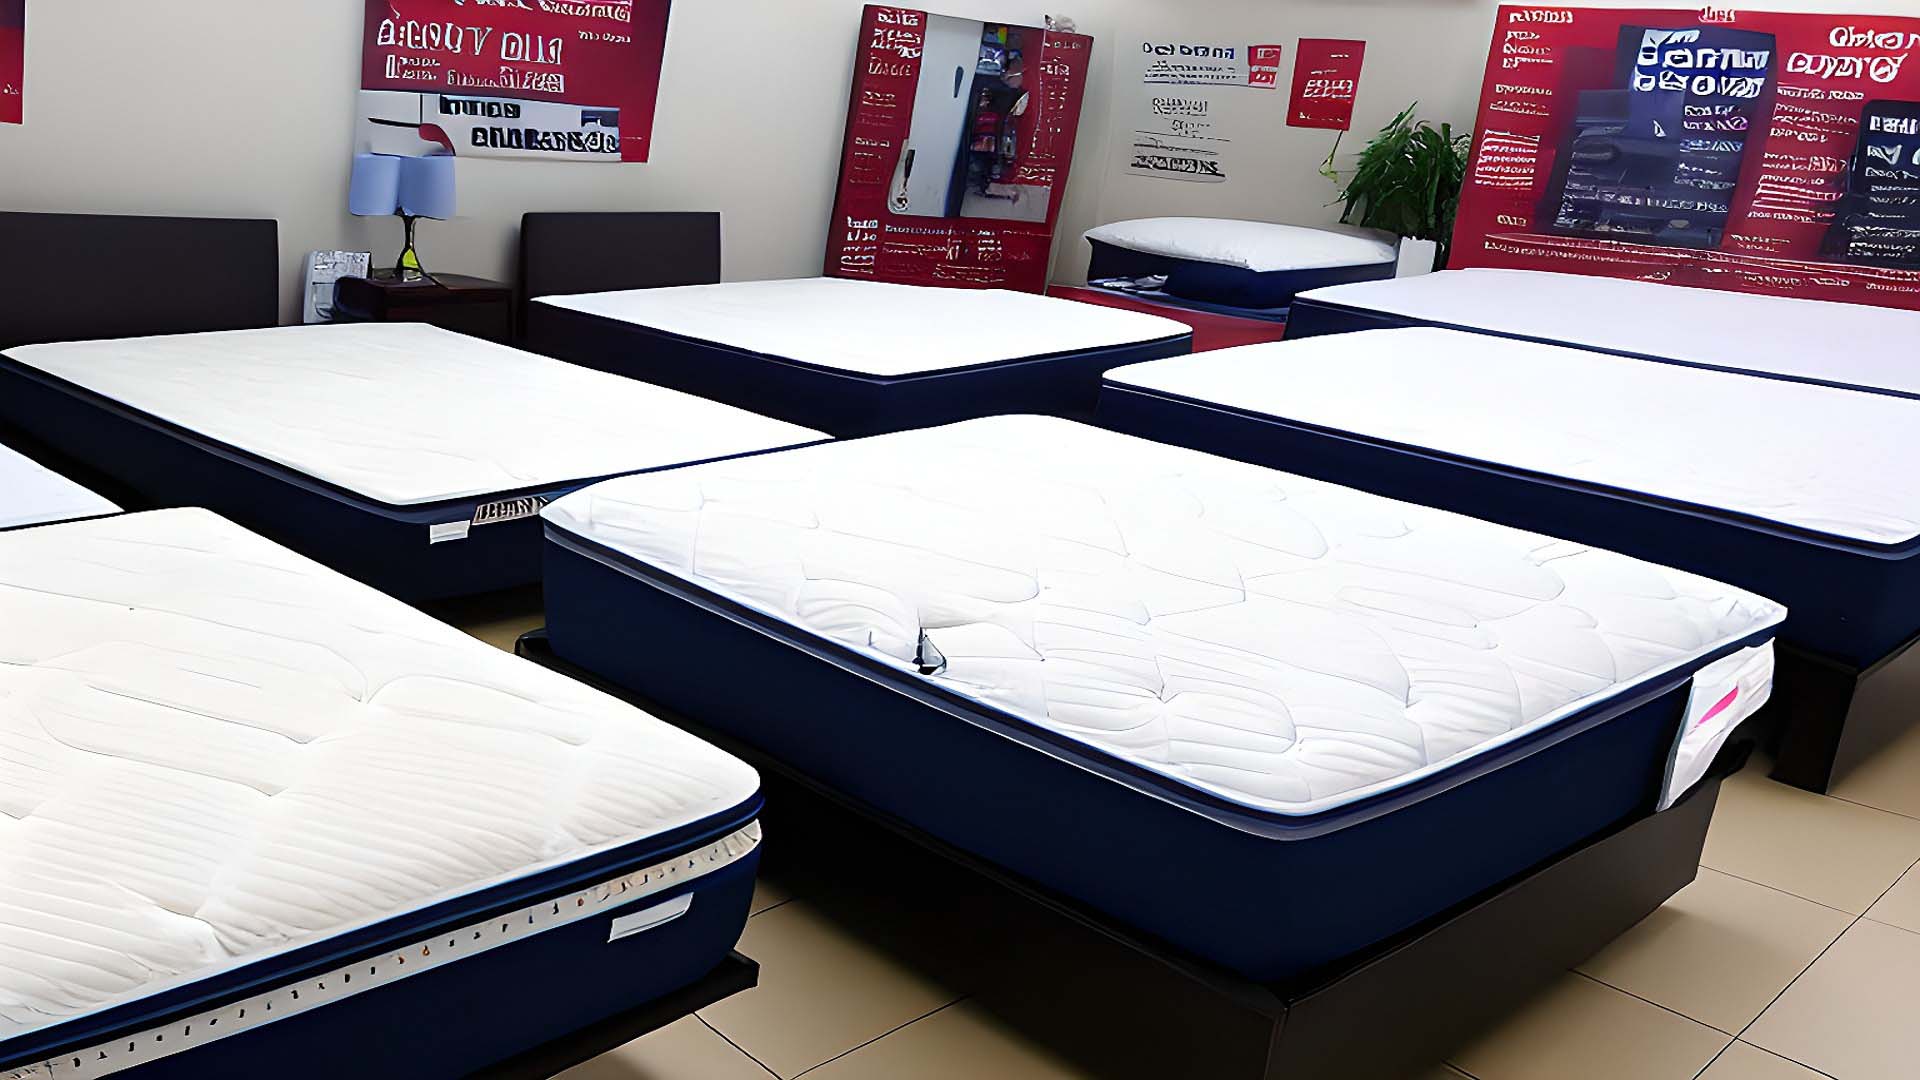 Mattress By Appointment in Lake Charles, Louisiana 70601